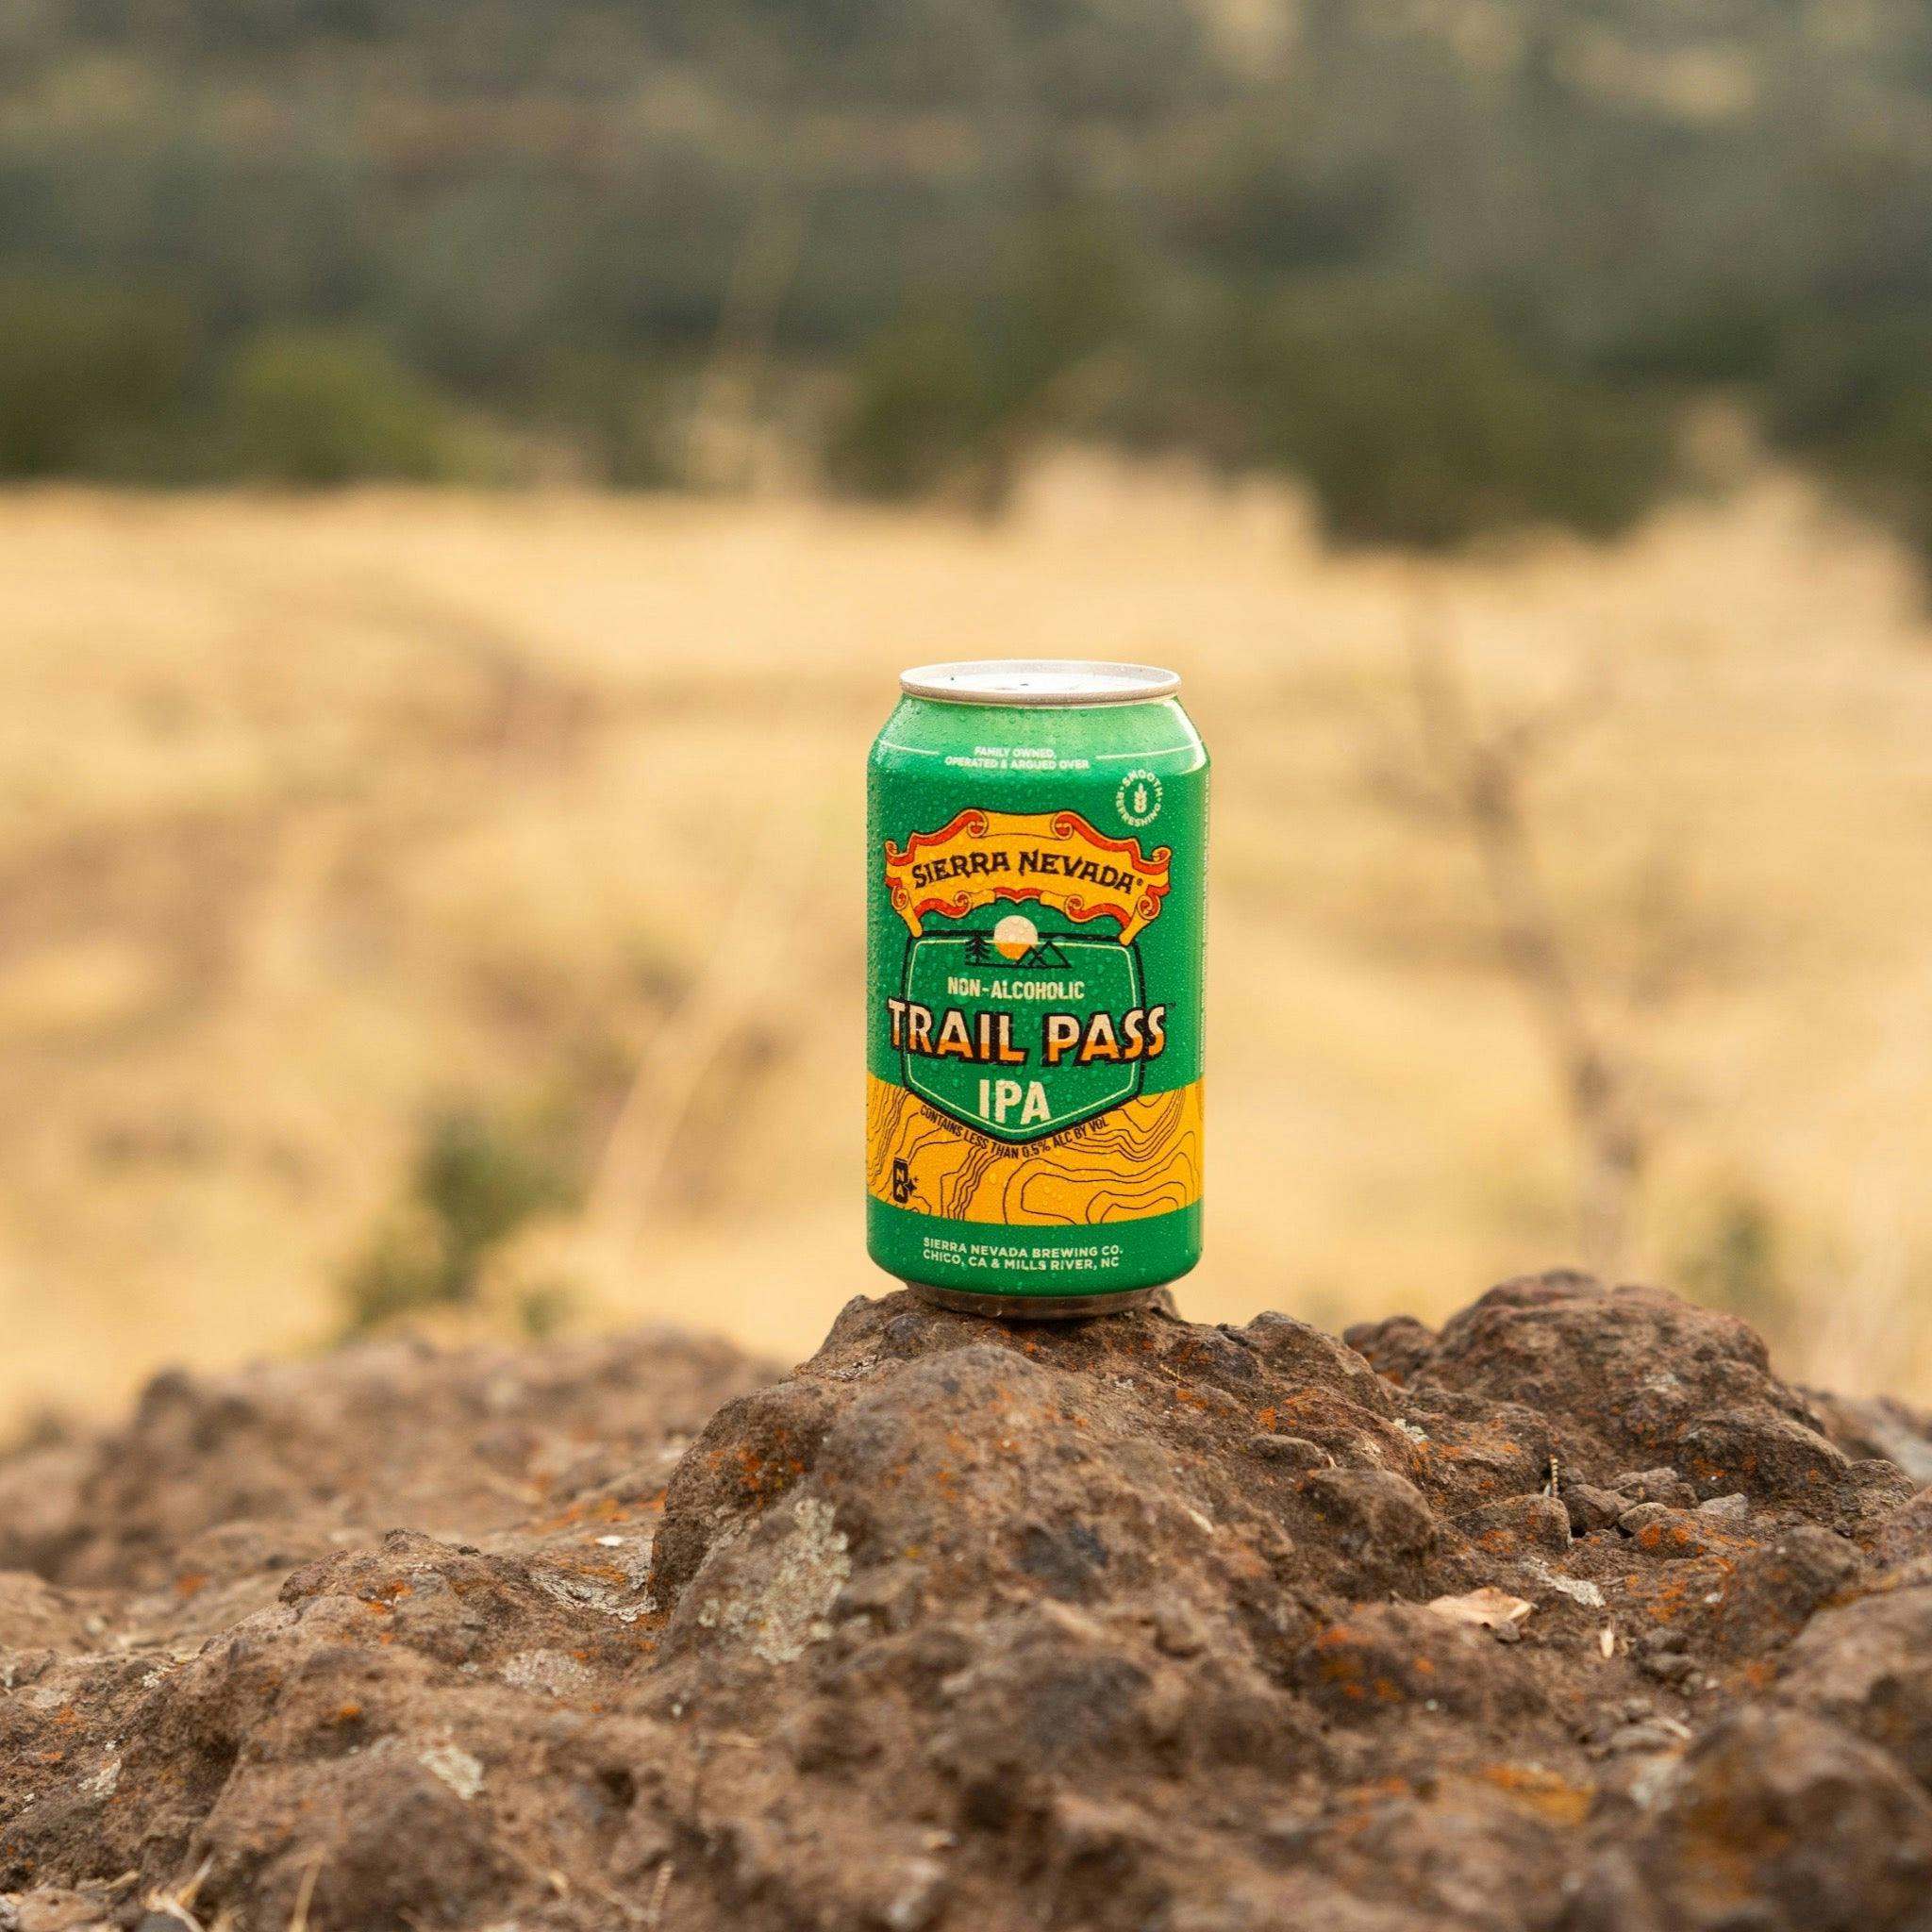 Sierra Nevada Brewing Co. Trail Pass IPA Non-Alcoholic Brew - A chilled can of Trail Pass IPA rests on a rocky outcropping overlooking a field.